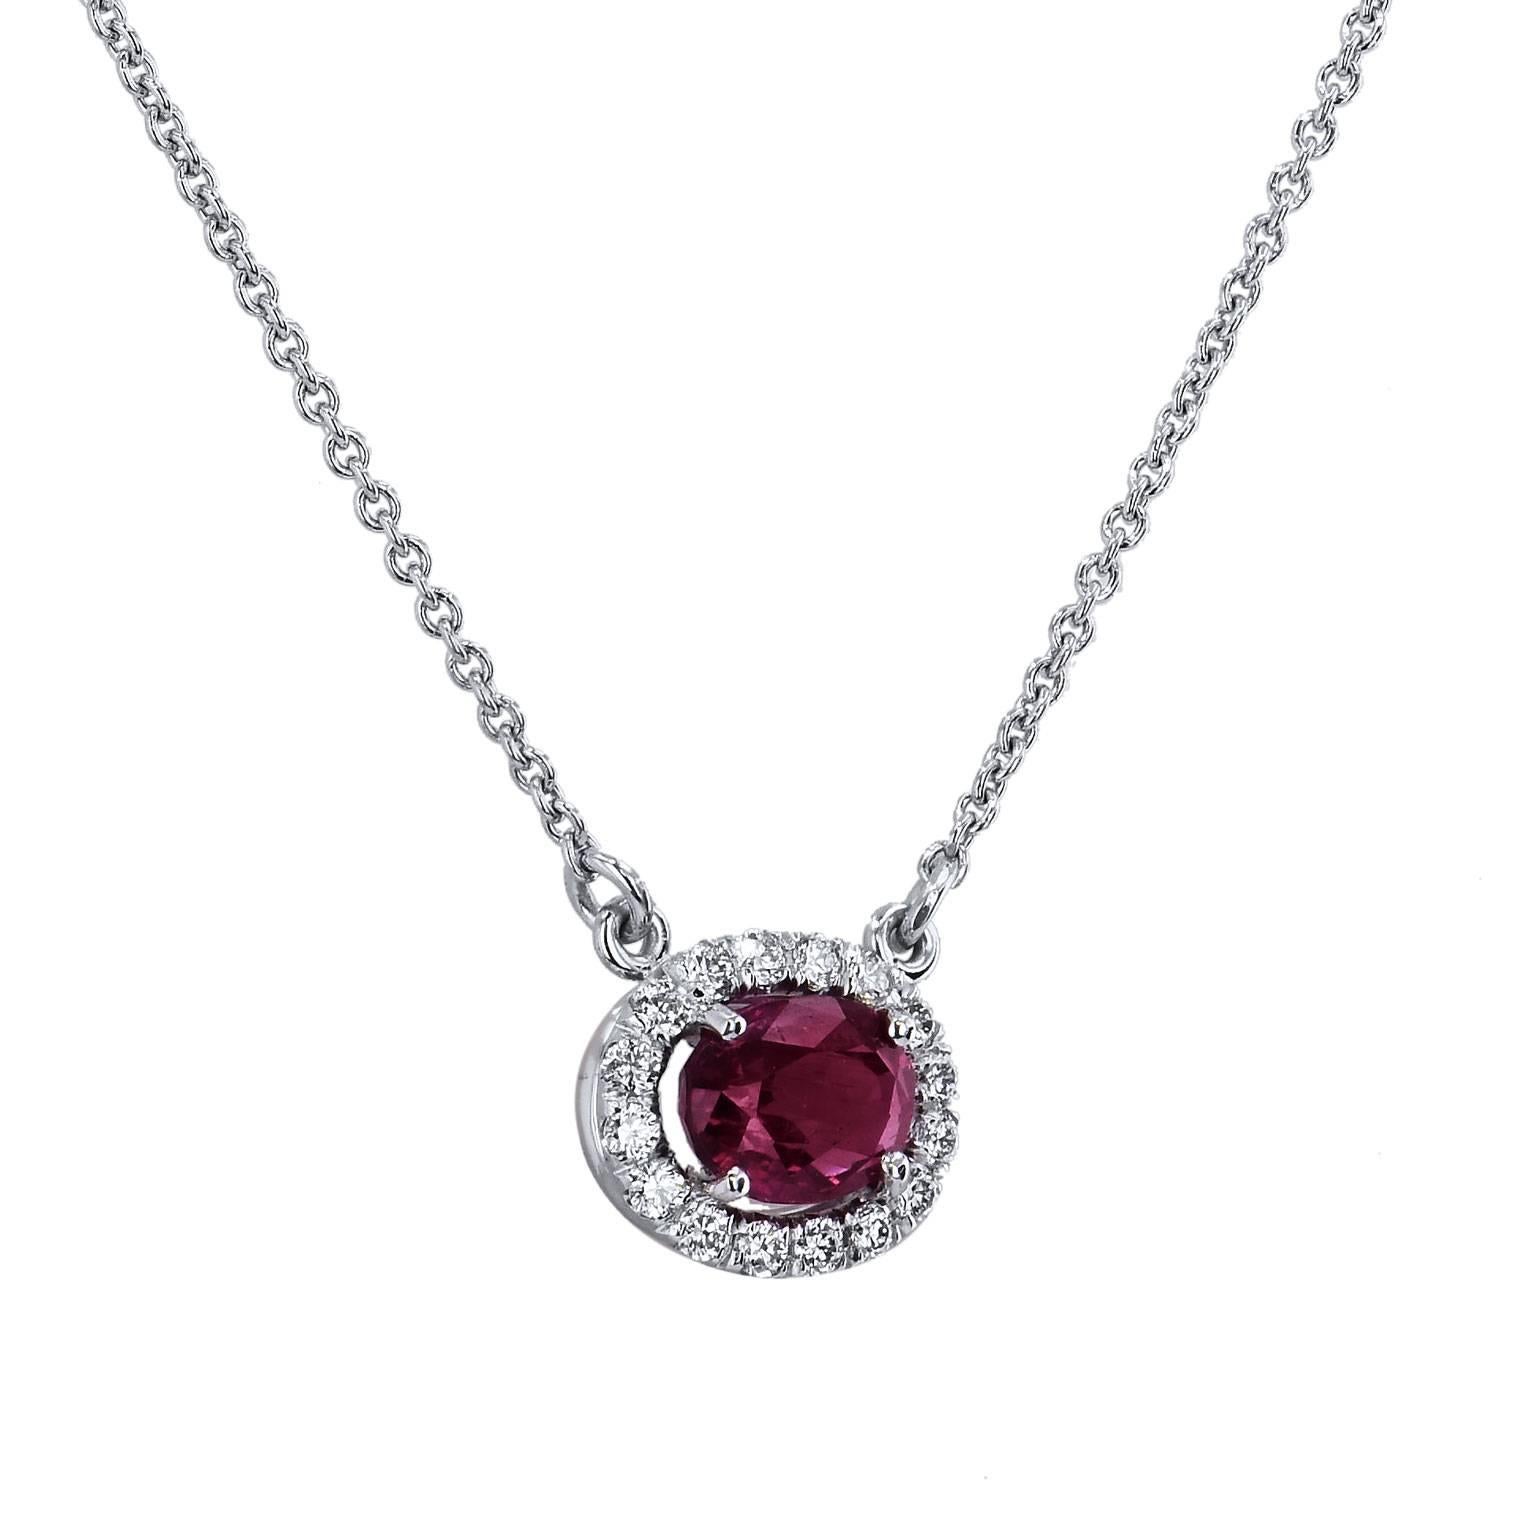 1.05 Carat Oval Thai Ruby & Diamond Halo Pendant 18 karat White Gold Necklace

Let the ruby's femininity and grace enrapture you in this handcrafted 18 karat white gold pendant necklace. 
A 1.05 carat oval Thai ruby is set at center and embraced by